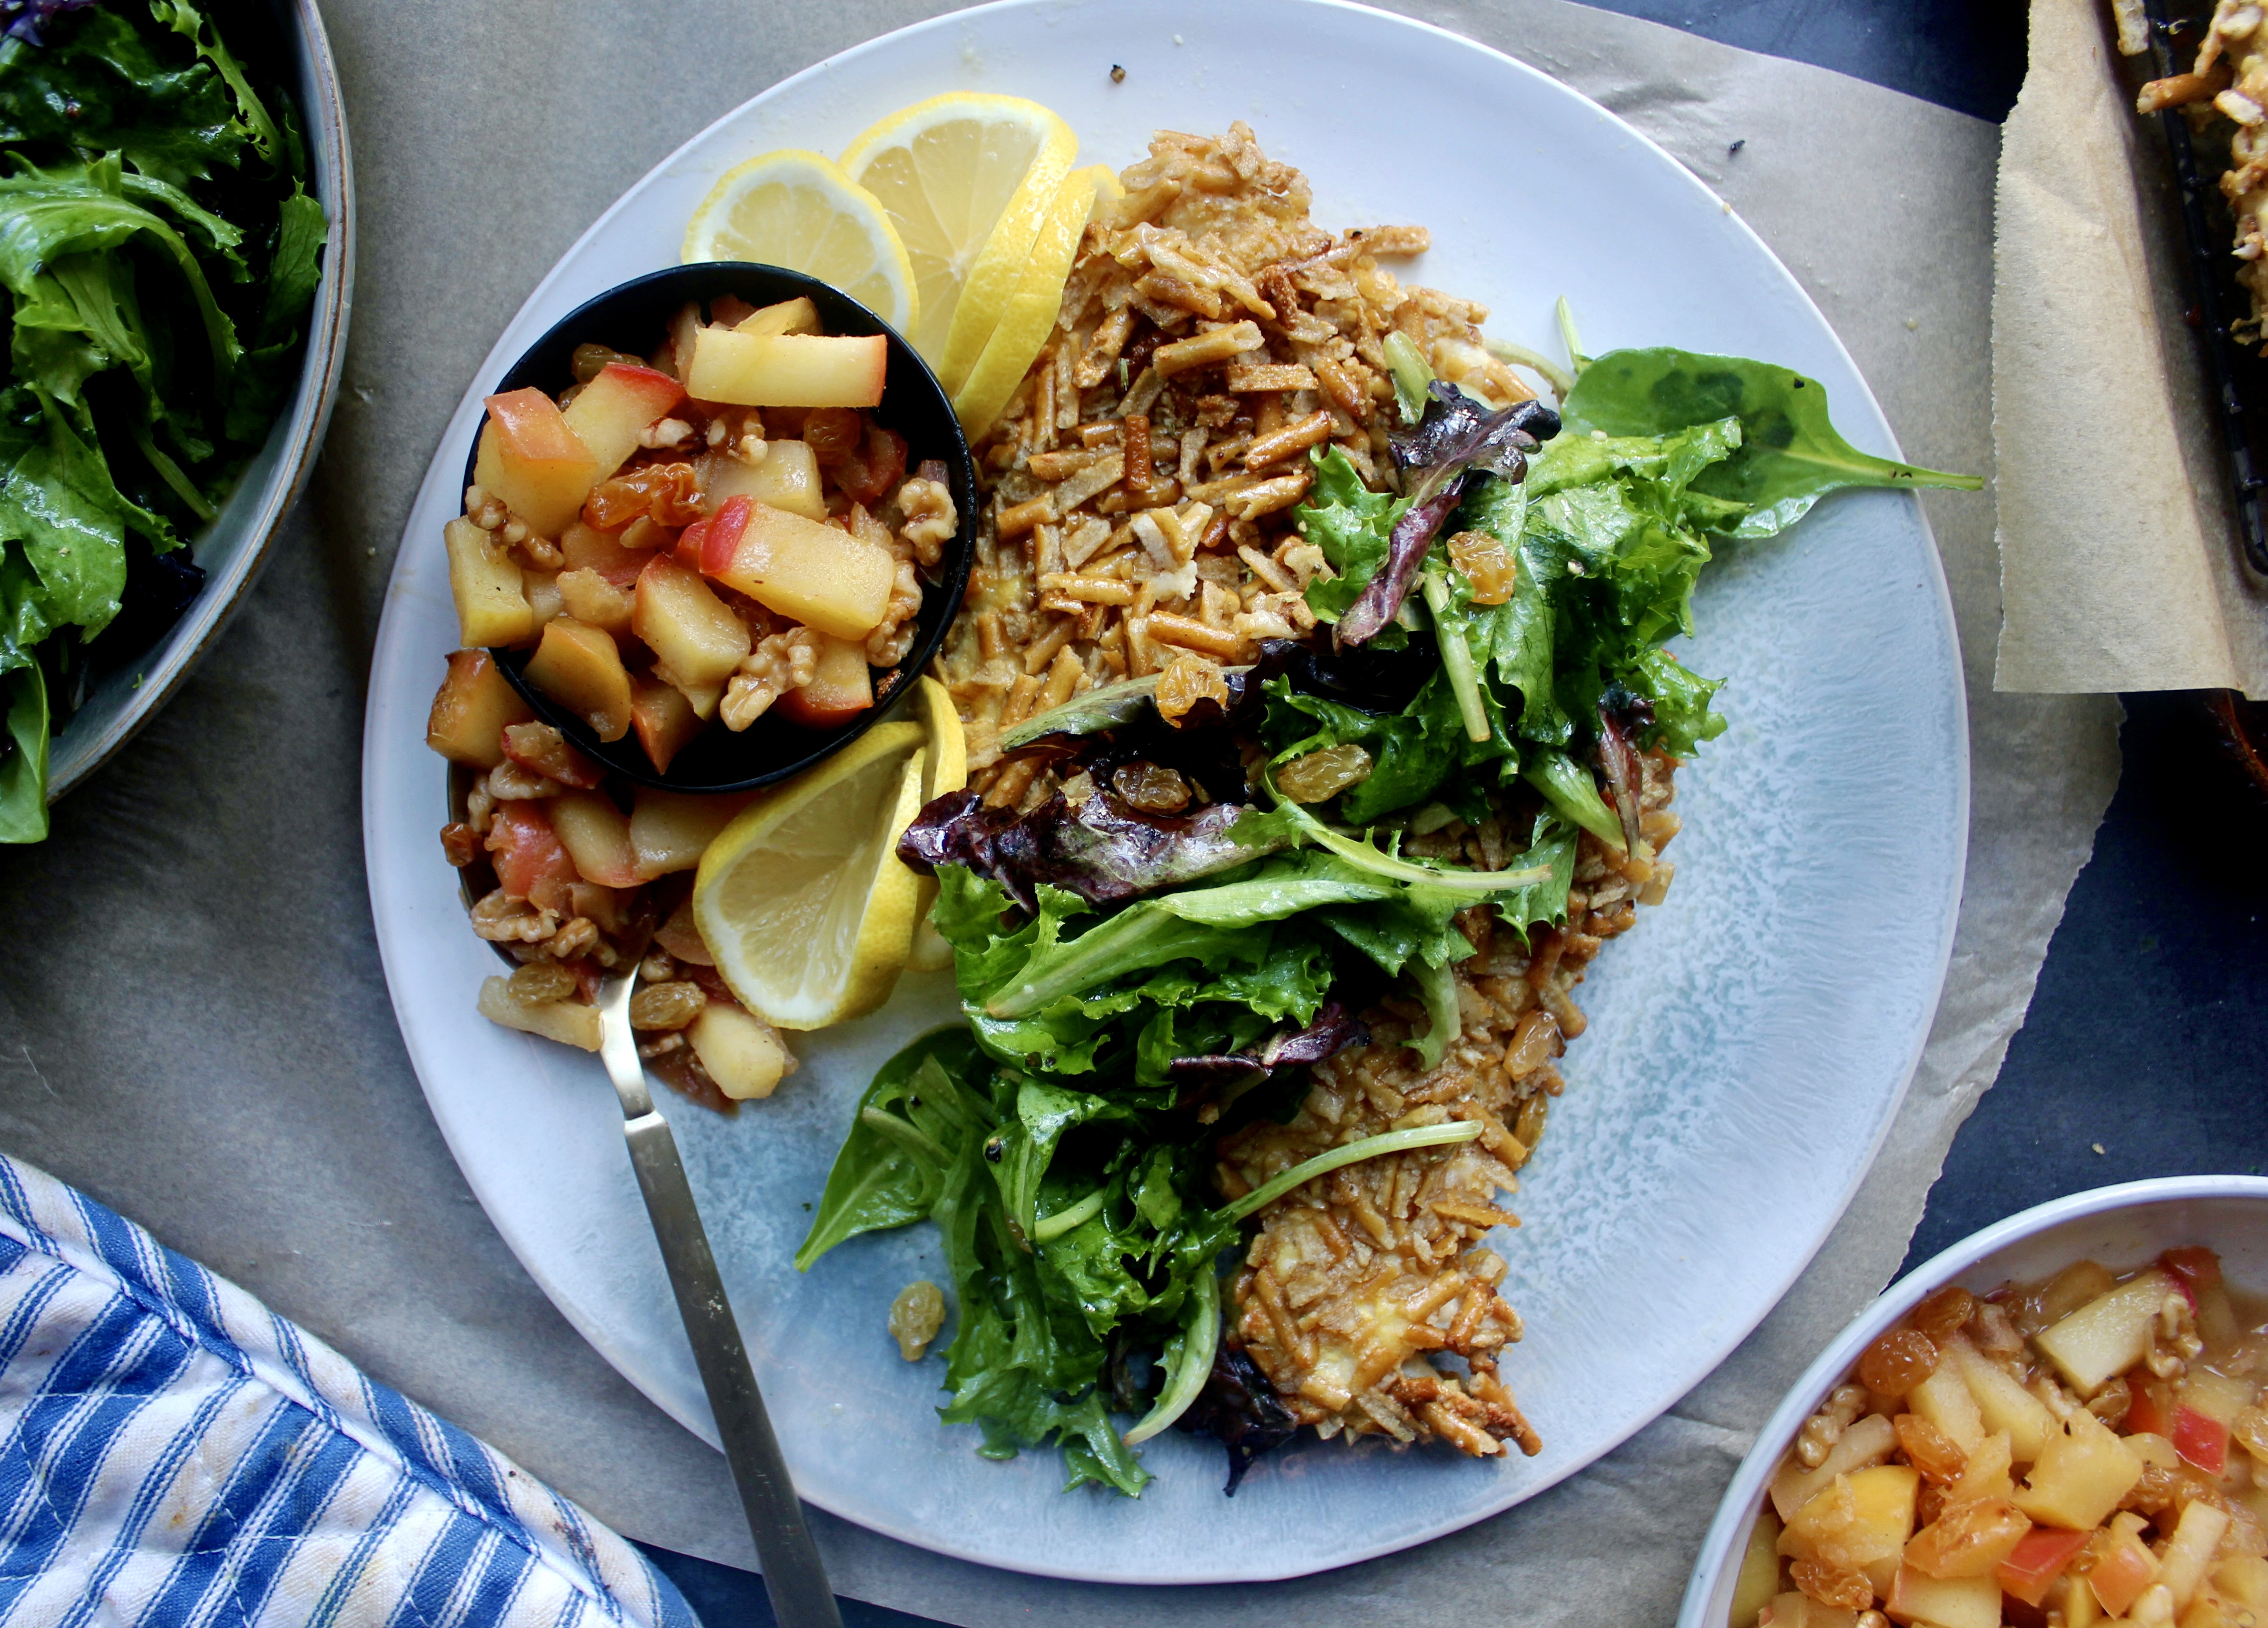 Crispy pretzel coated chicken paillard topped with lemony mixed greens and a sweet and tangy apple chutney: this Apple Chutney Pretzel Crusted Chicken is an all time favorite dinner!